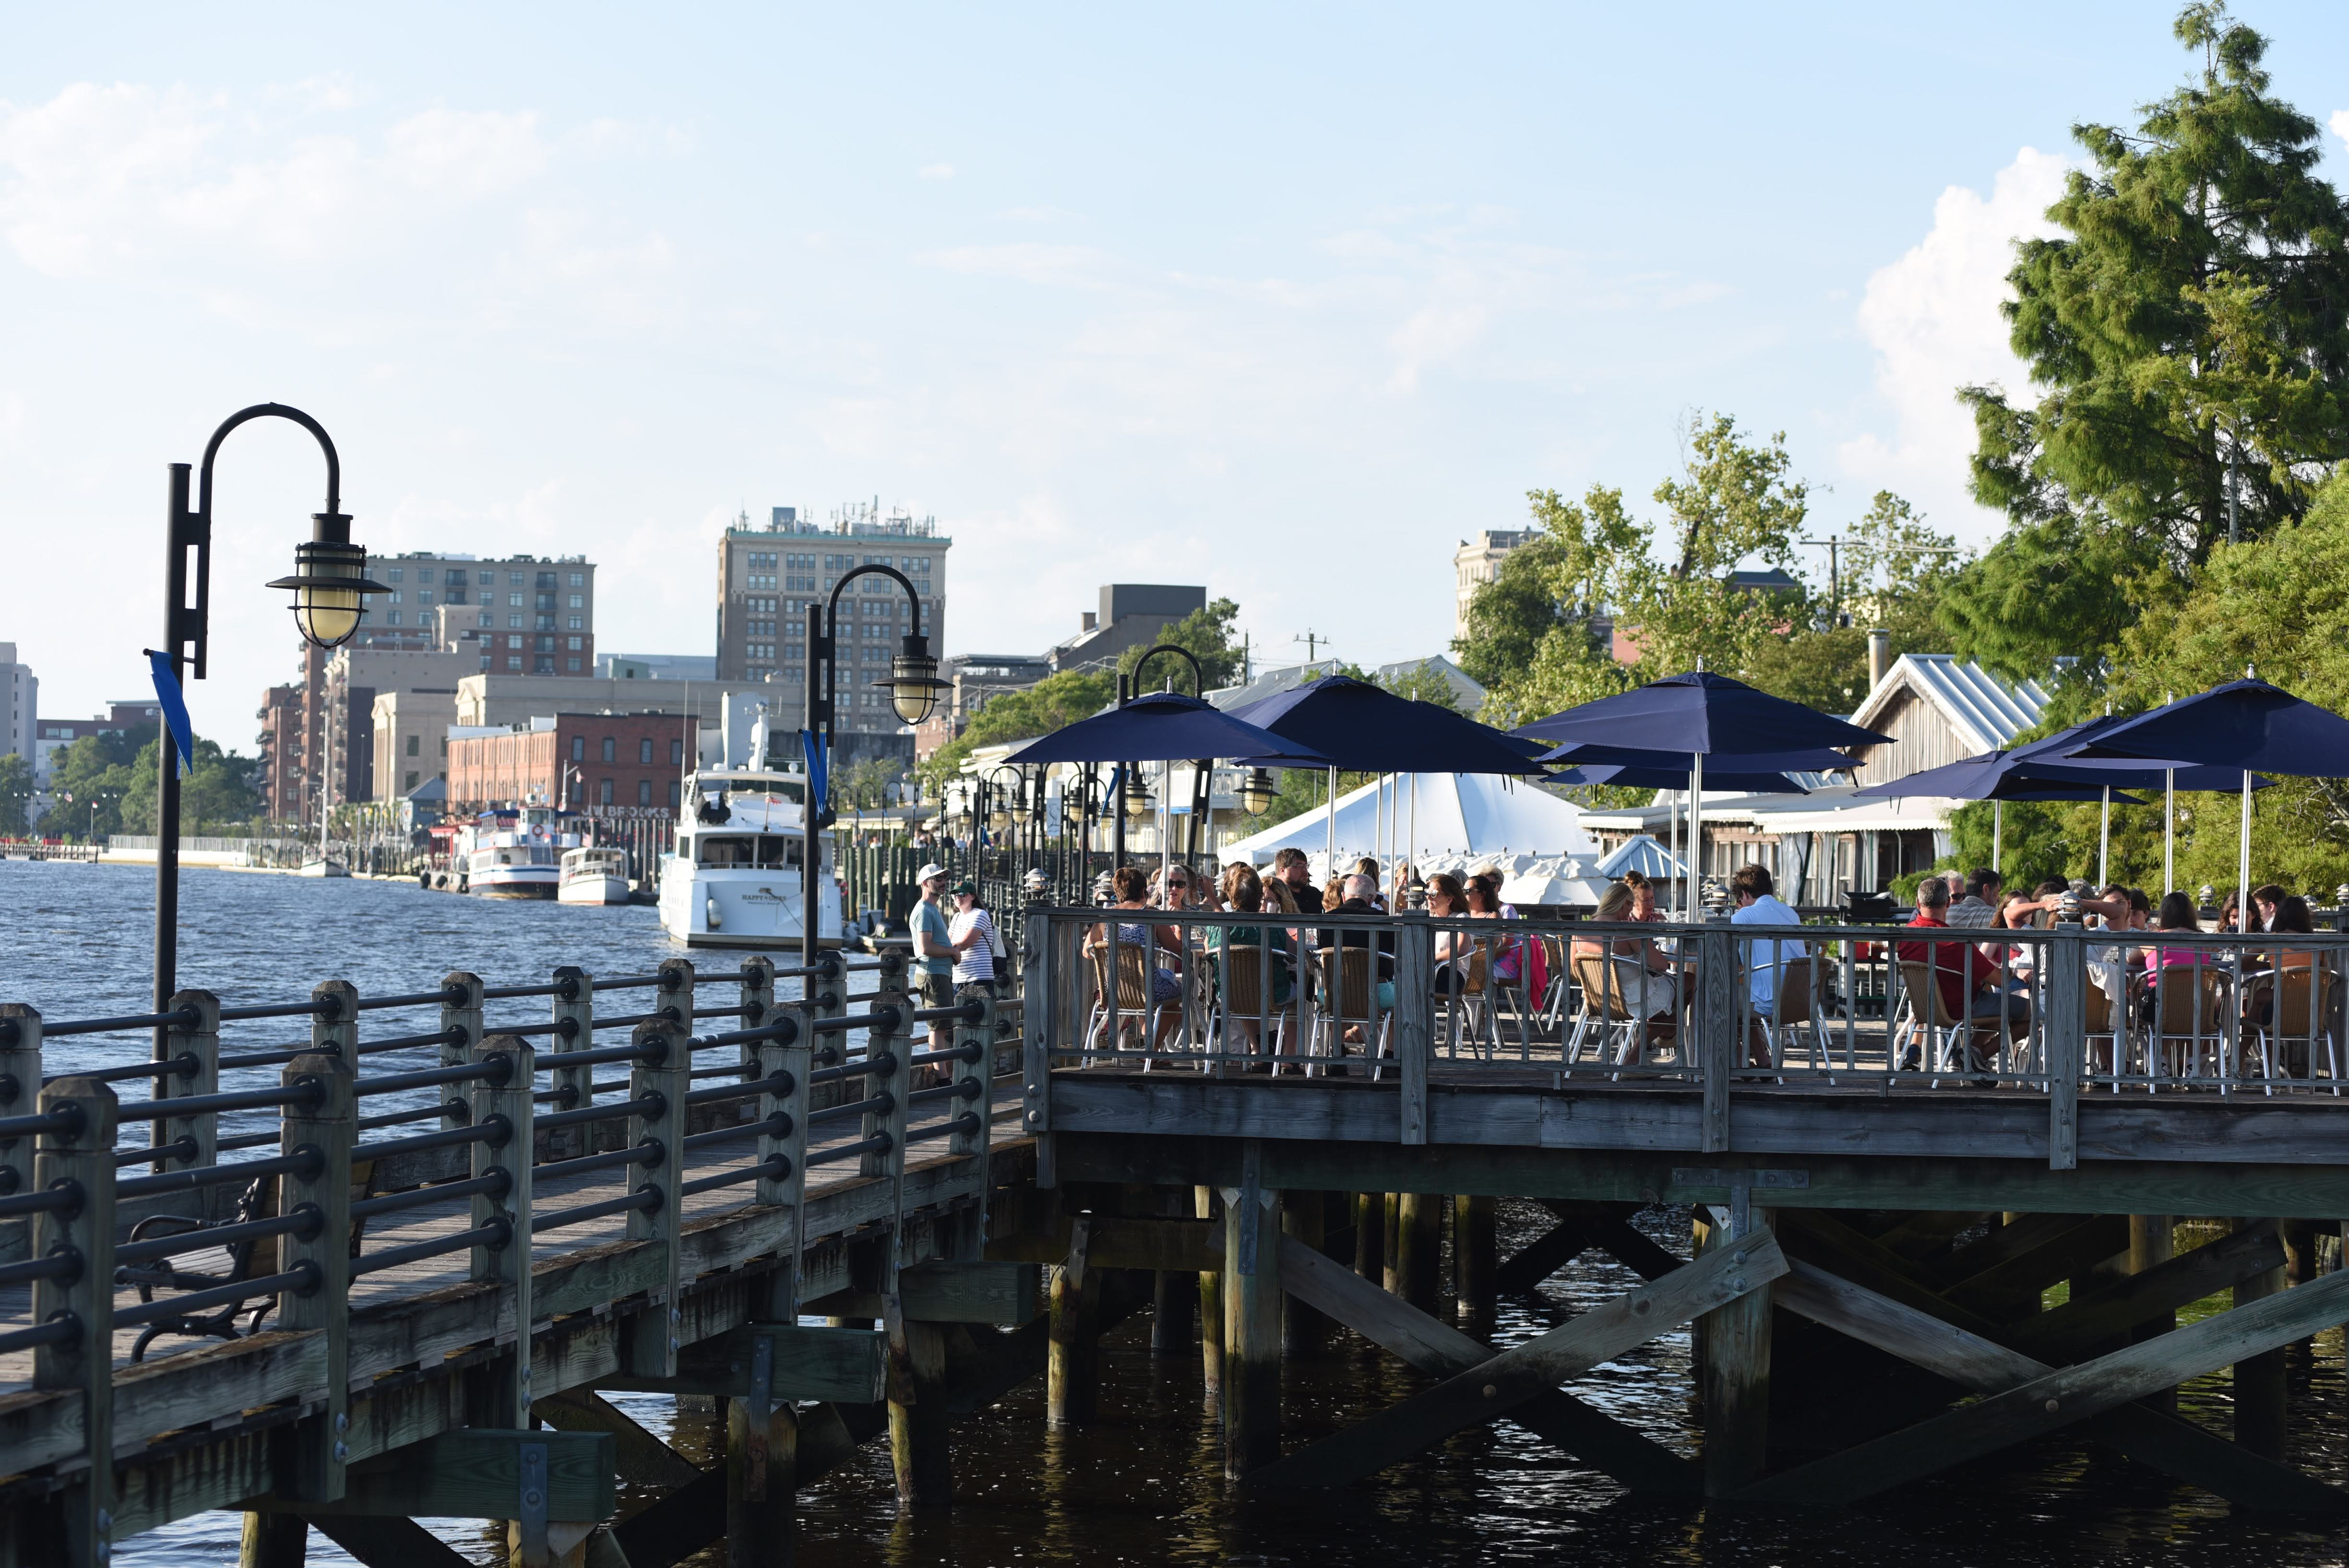 People enjoying a lovely day along the Wilmington Riverwalk